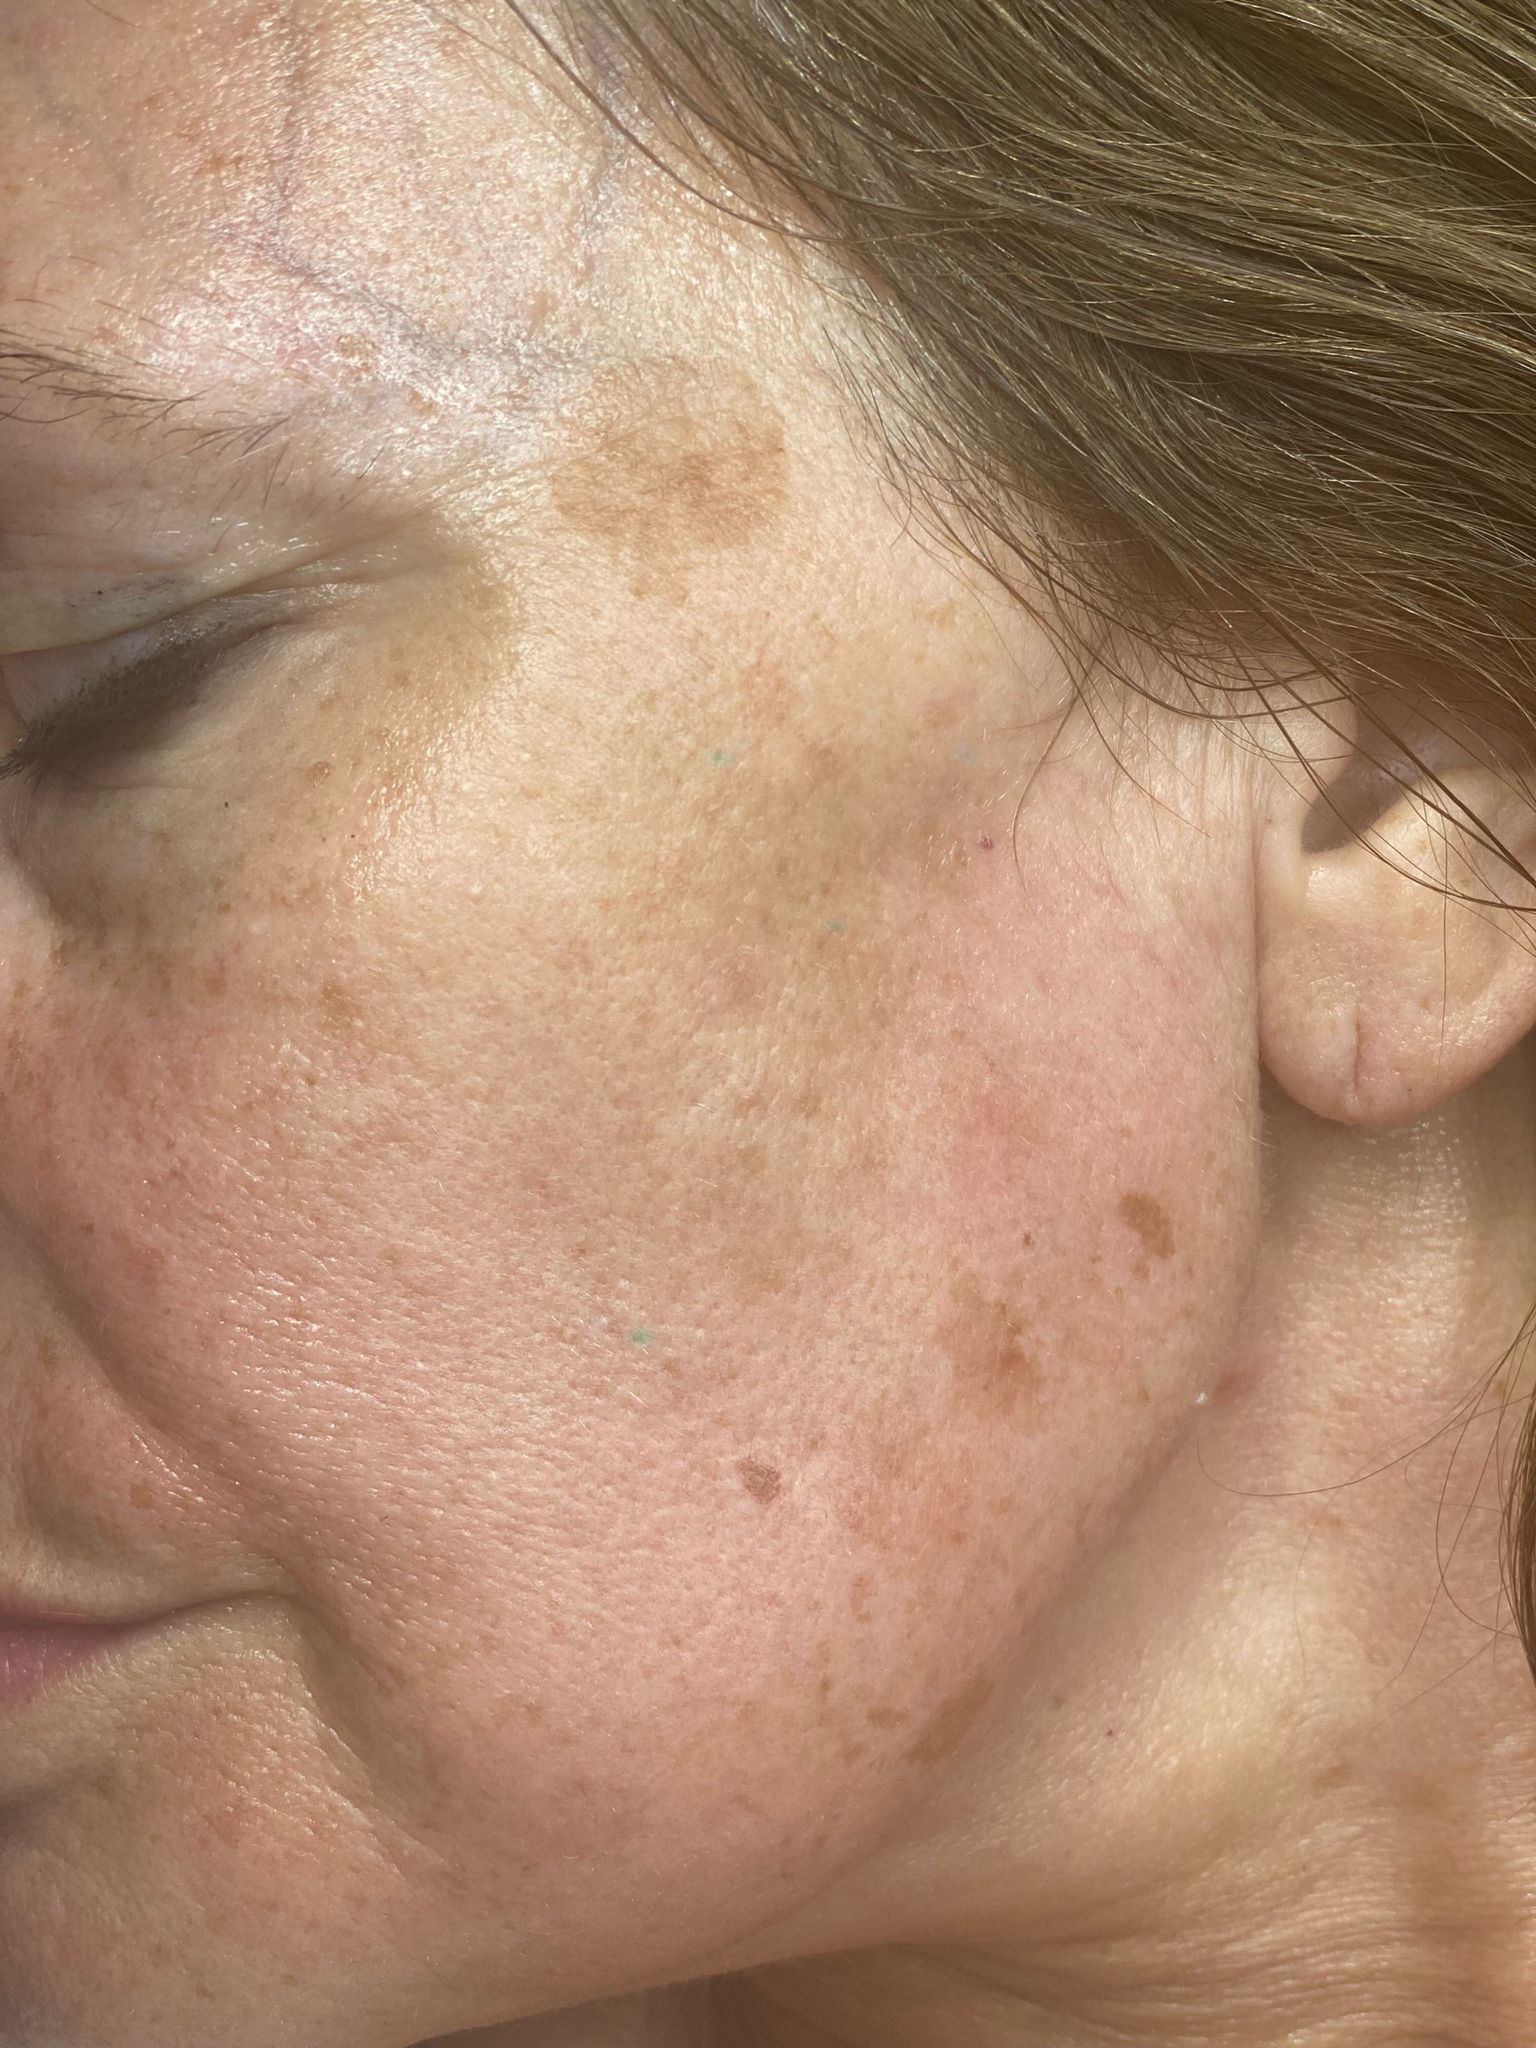 What Are Sunspots on the Skin and How Should I Treat Them?